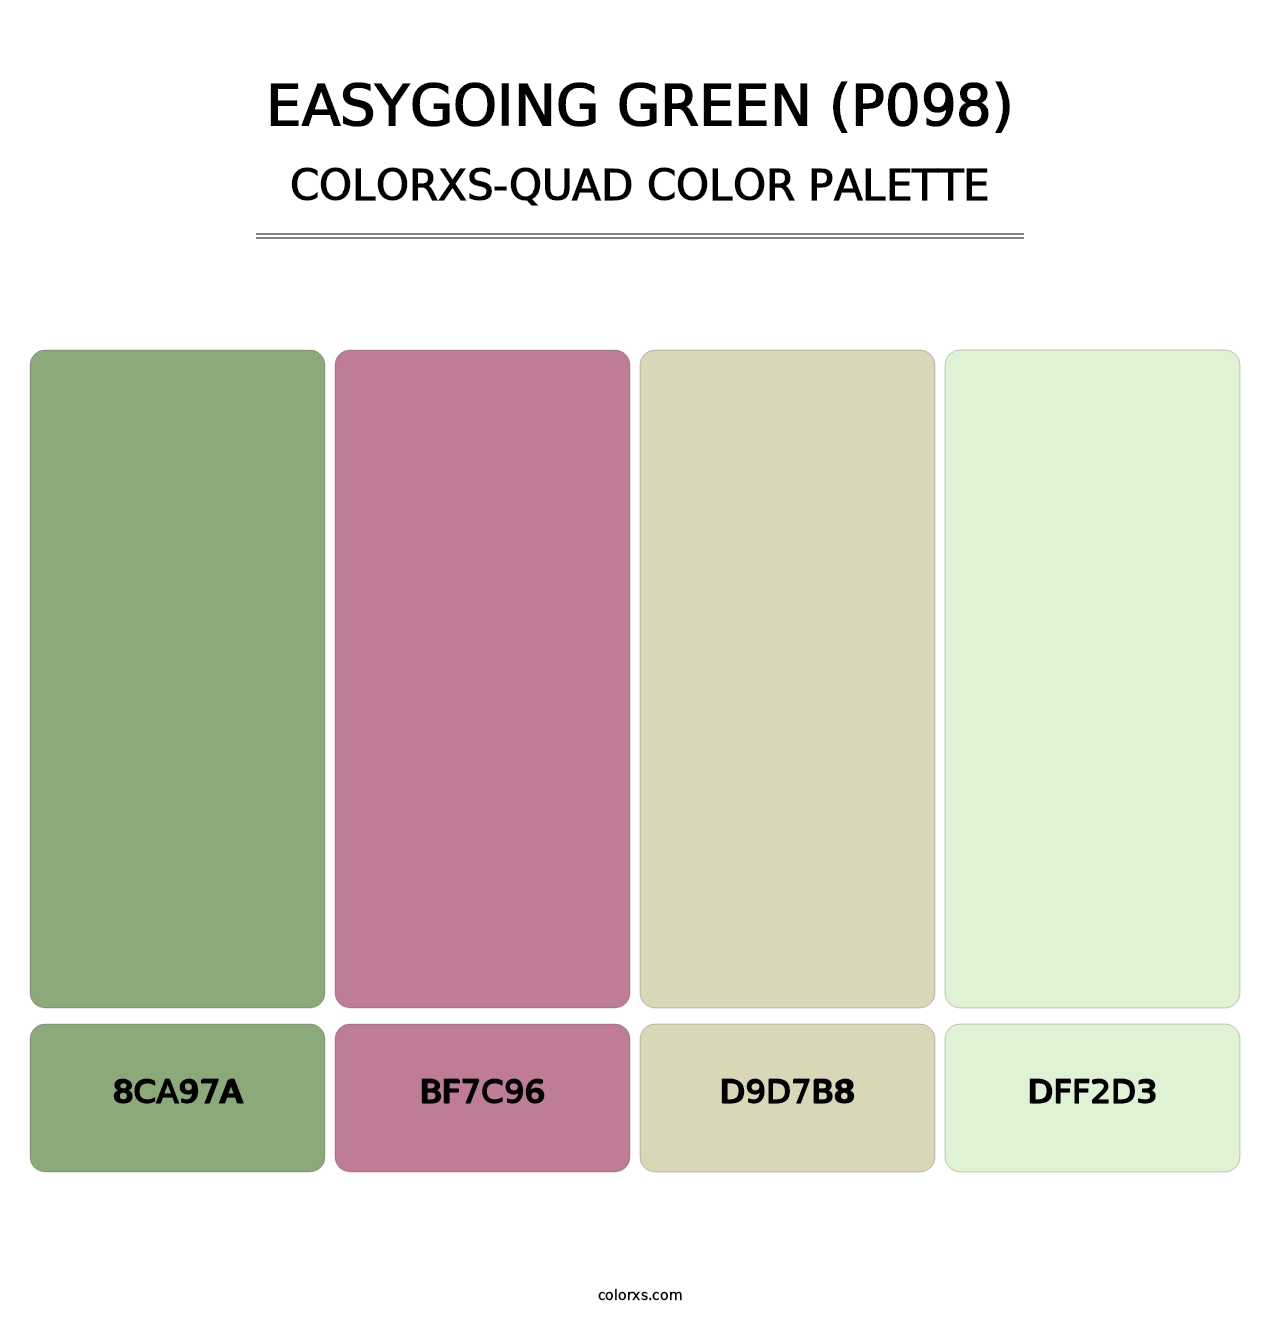 Easygoing Green (P098) - Colorxs Quad Palette